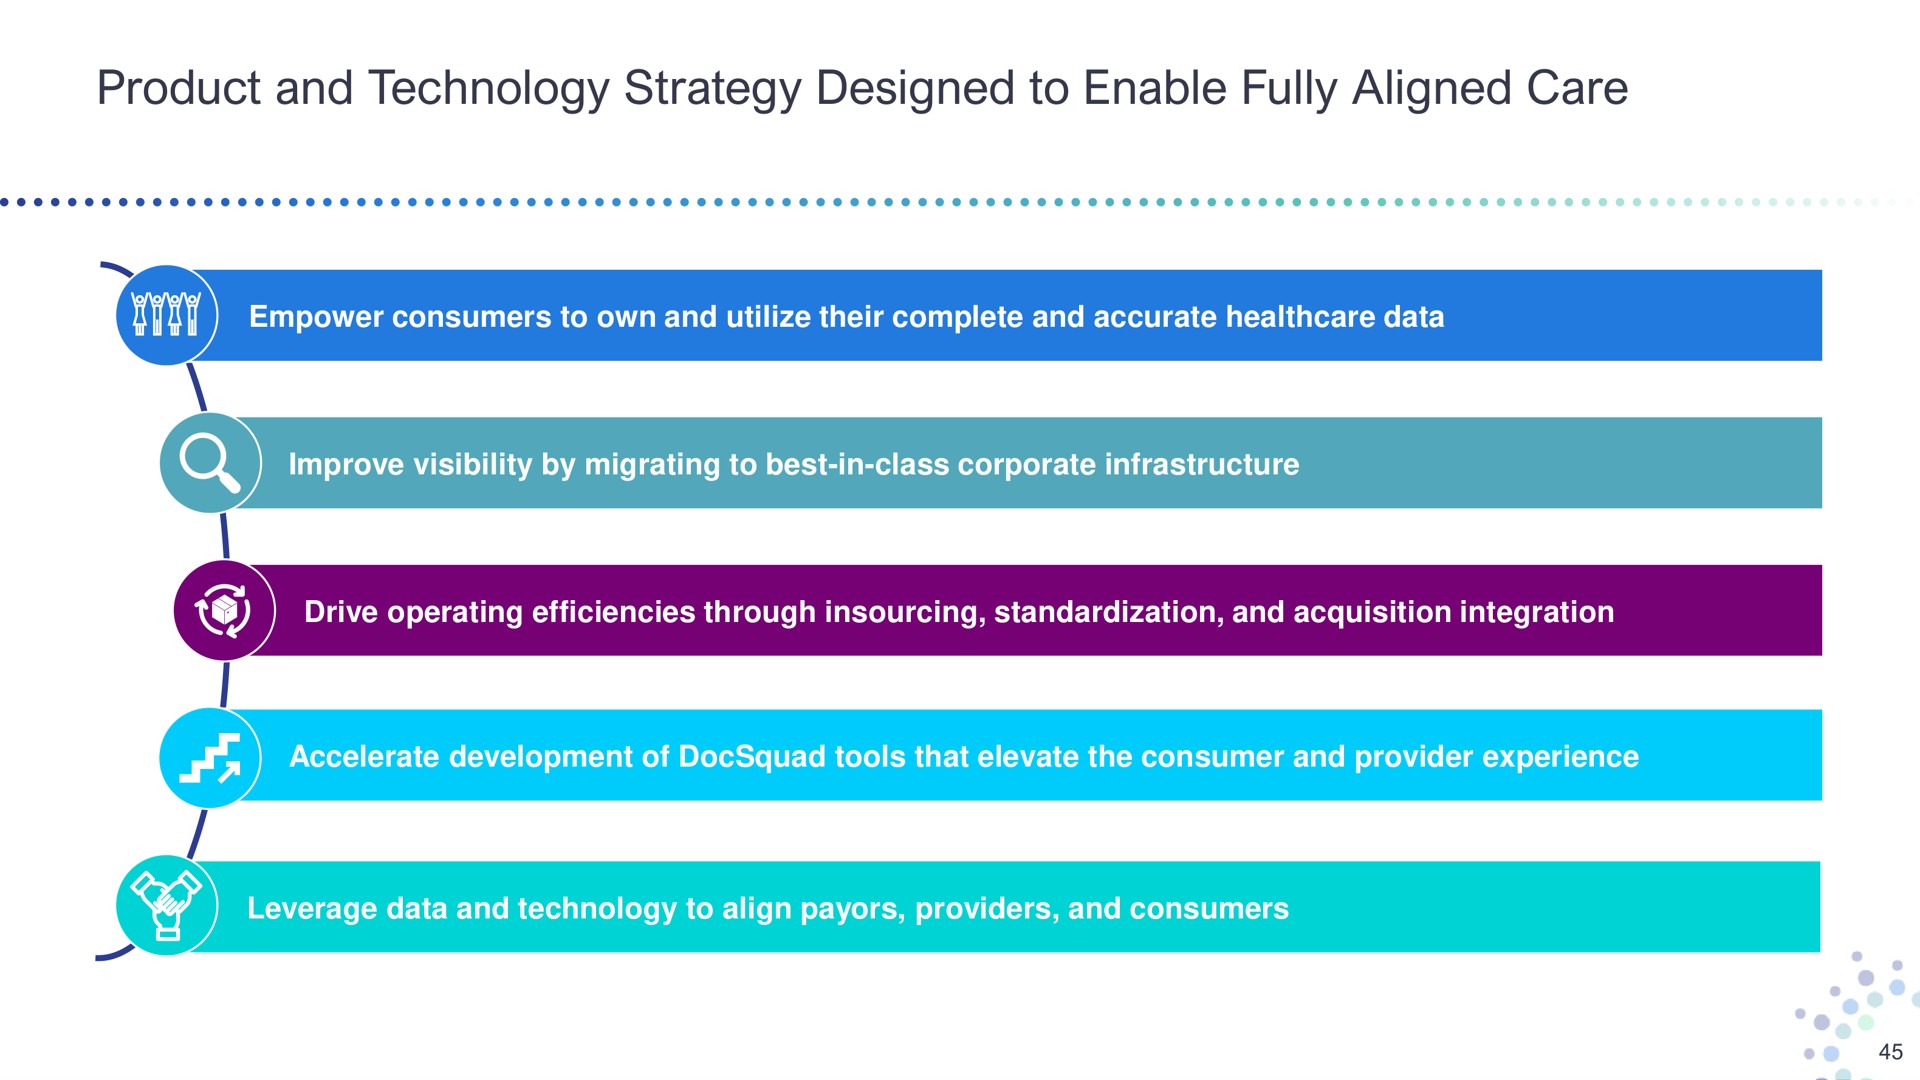 product and technology strategy designed to enable fully aligned care improve visibility by migrating best in class corporate infrastructure empower consumers own utilize their complete accurate data accelerate development of tools that elevate the consumer provider experience drive operating efficiencies through standardization acquisition integration leverage data align providers consumers | Bright Health Group